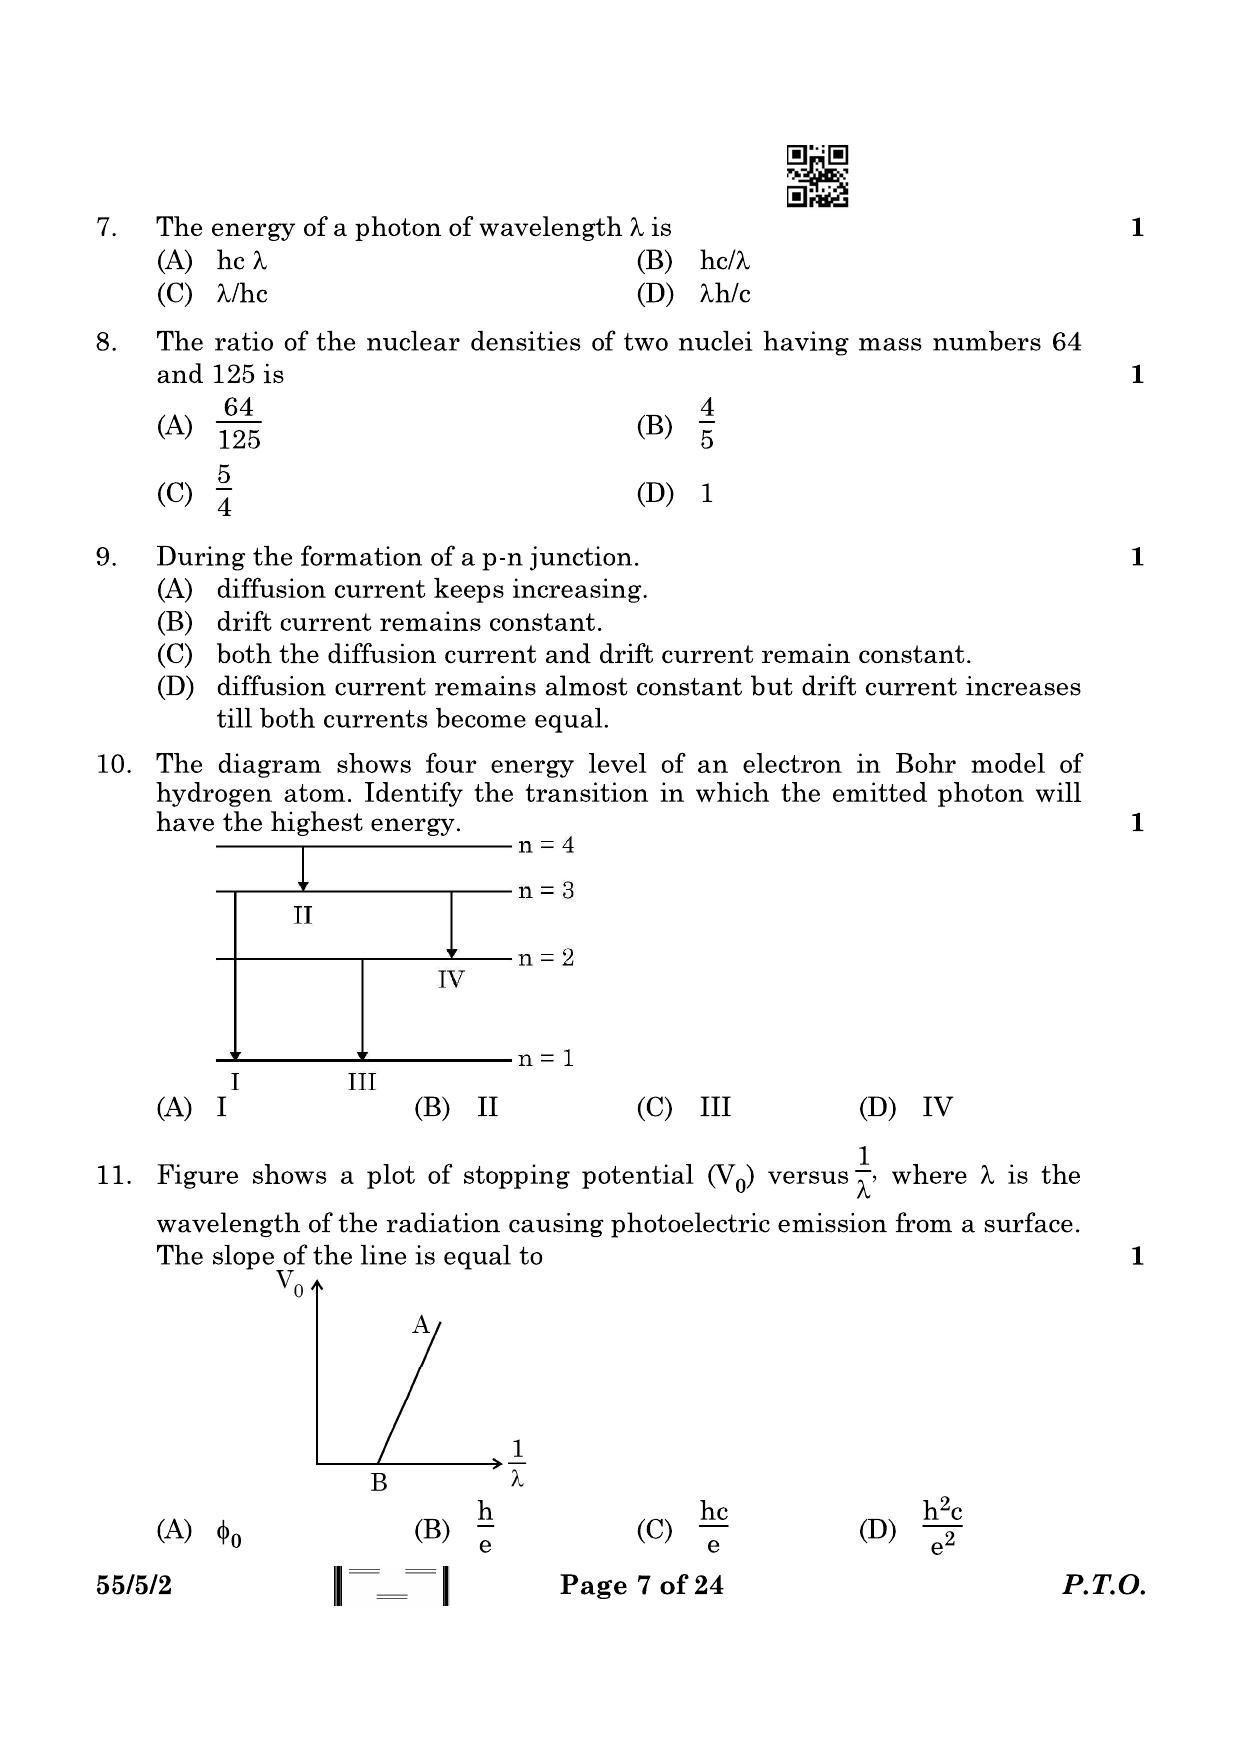 CBSE Class 12 55-5-2 Physics 2023 Question Paper - Page 7